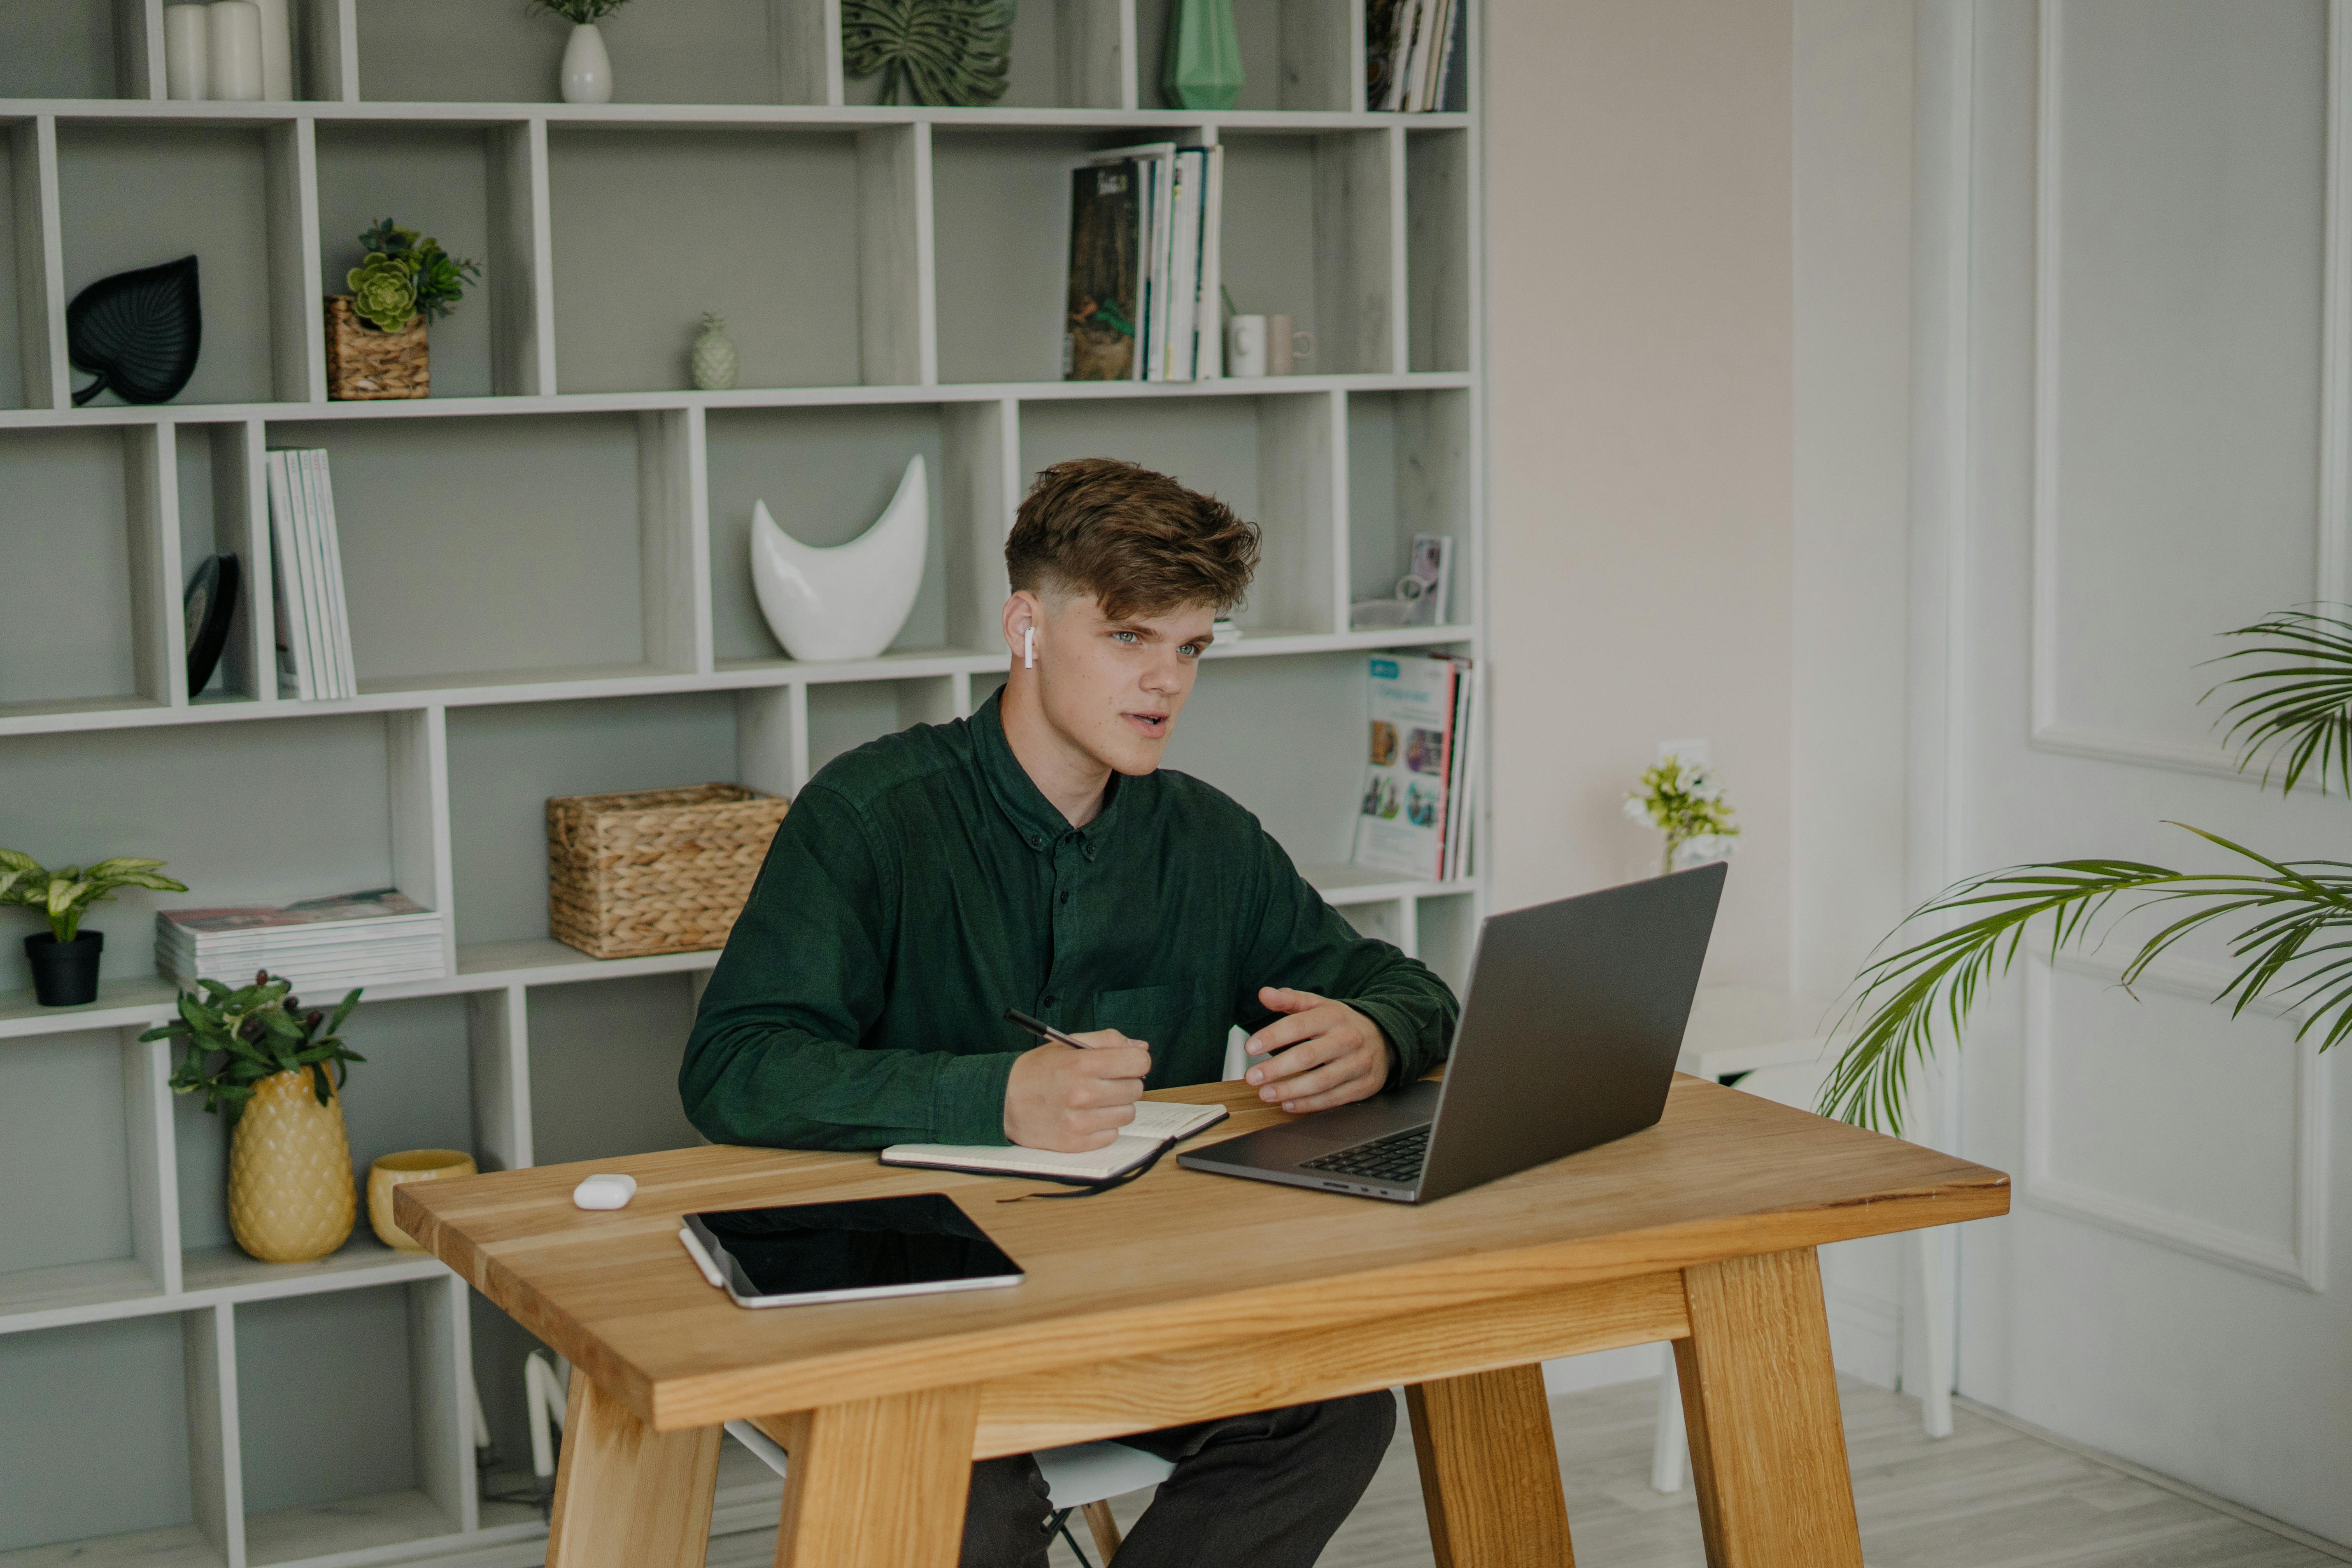 a male student in green long sleeves using a laptop on a wooden desk